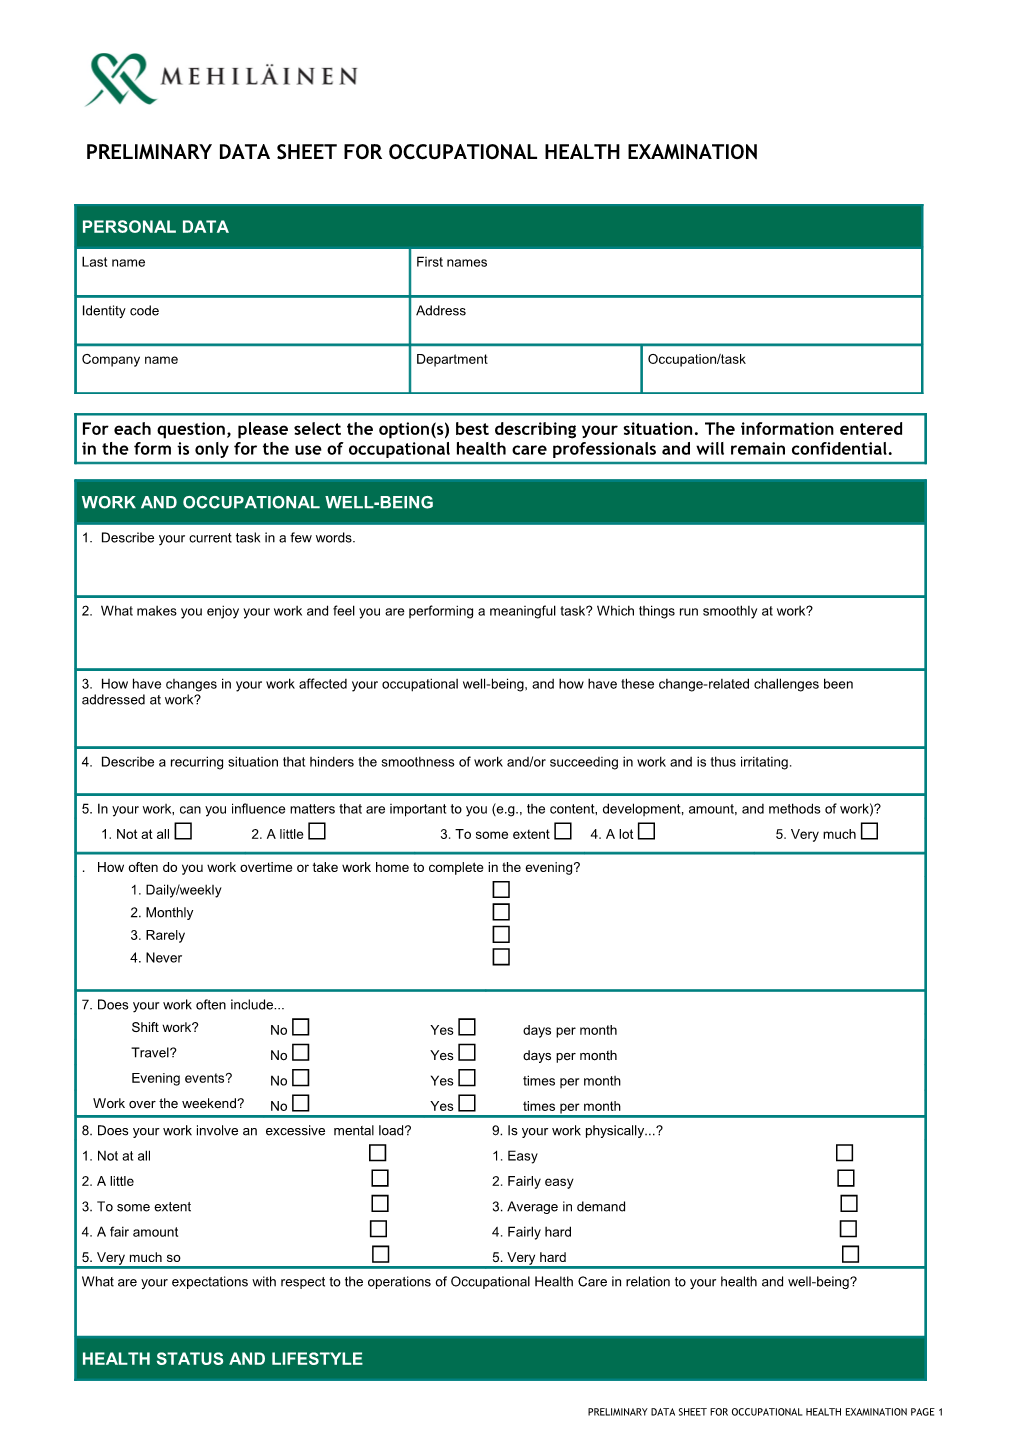 Preliminary Data Sheet for Occupational Health Examination